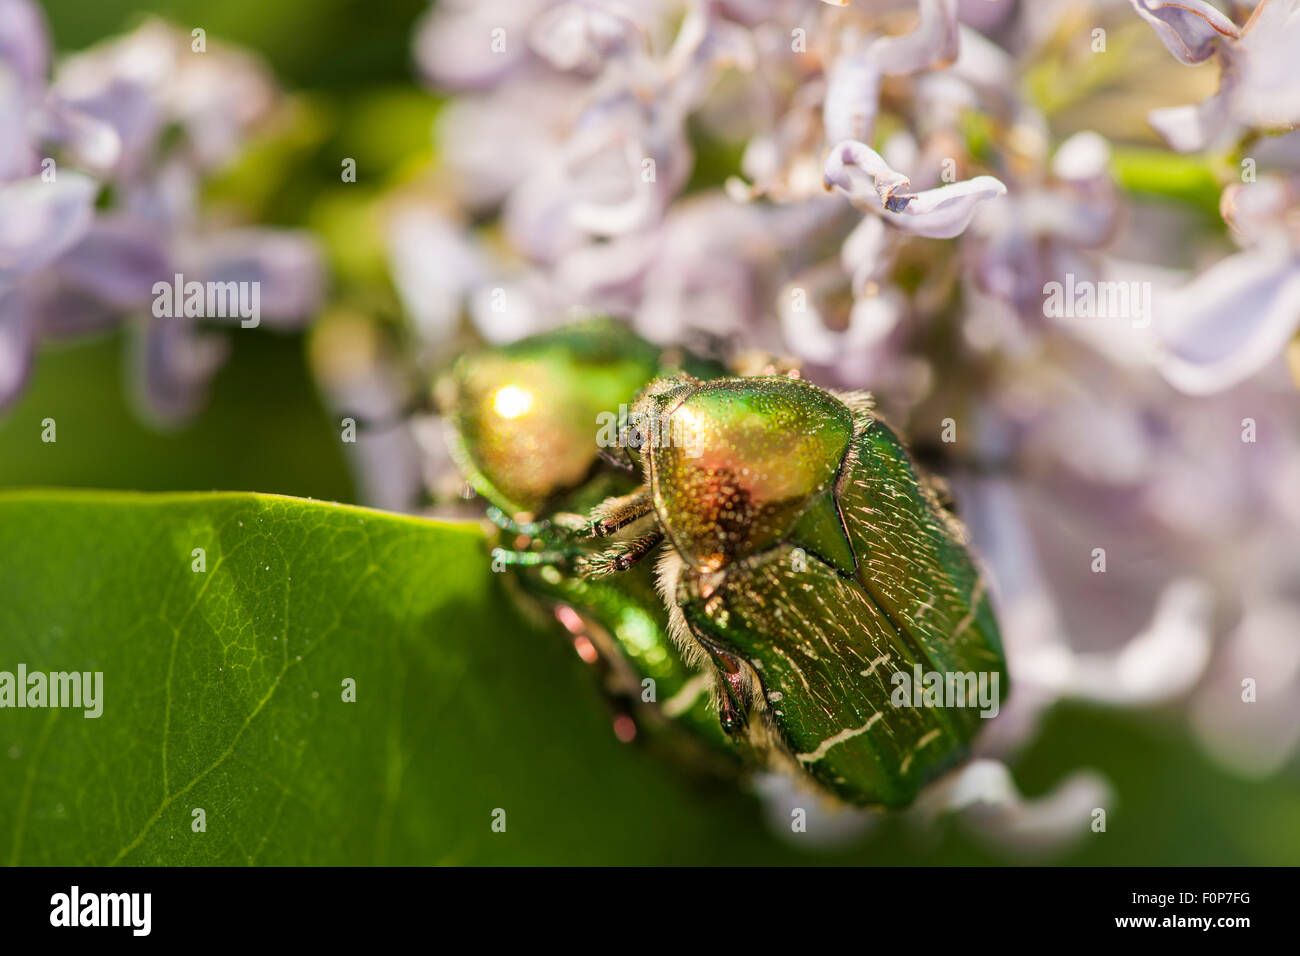 Macro view of two rose chafer (Cetonia aurata) mating on a garden hyacinth (Hyacinthus orientalis) against blurred background Stock Photo